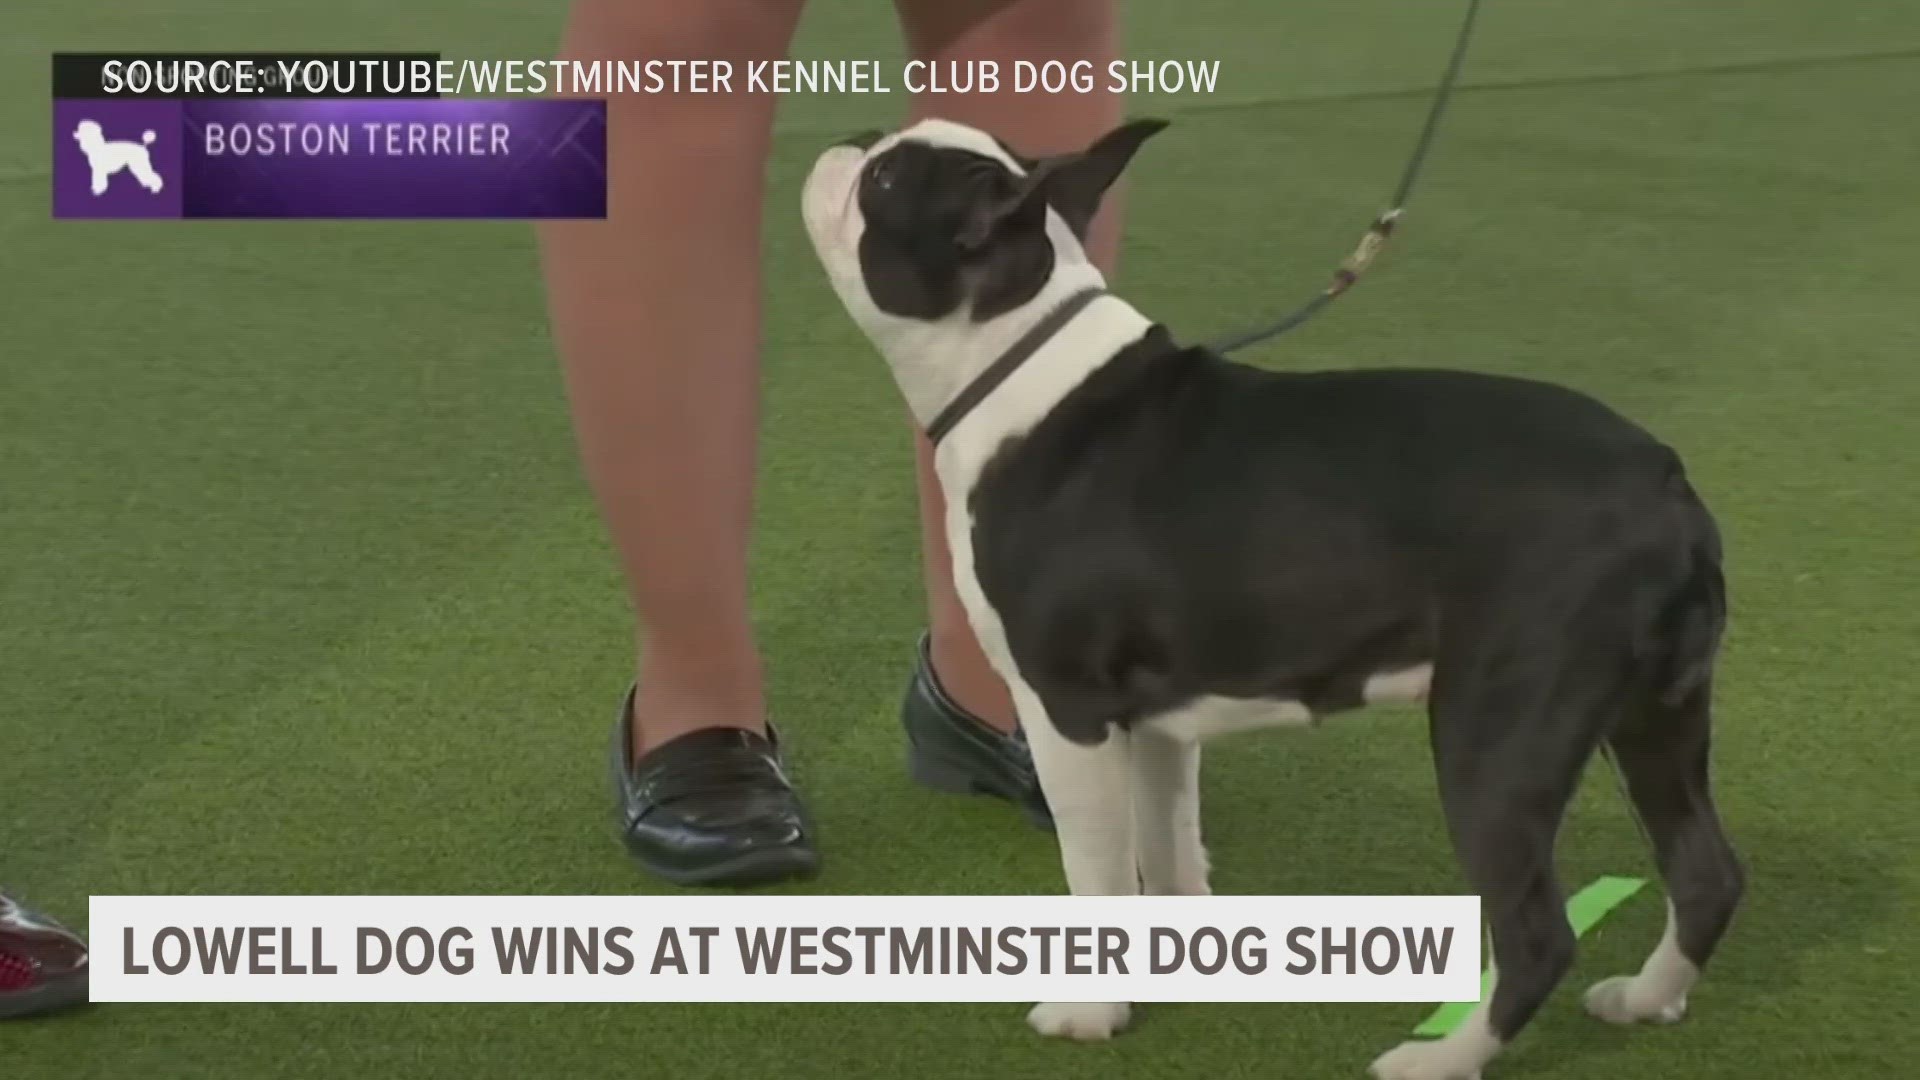 Their 2 year old Boston Terrier, Sparrow, won "Best in Breed" last weekend at the West Minster Dog show in Queens New York.